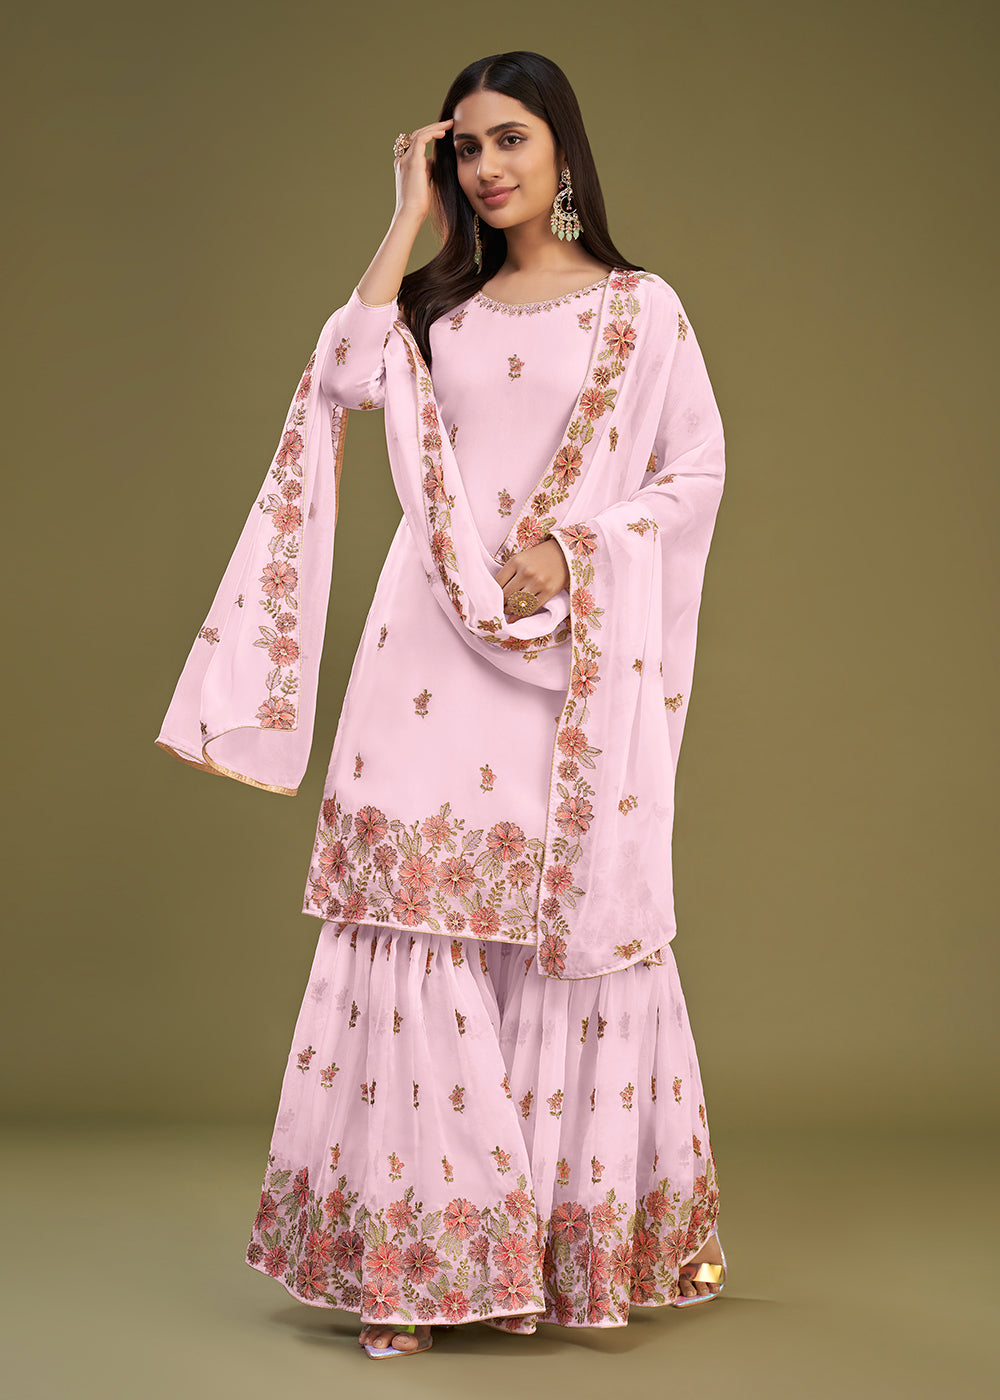 Shop Now Georgette Pink Multi Thread Embroidered Gharara Suit Online at Empress Clothing in USA, UK, Canada, Italy & Worldwide. 